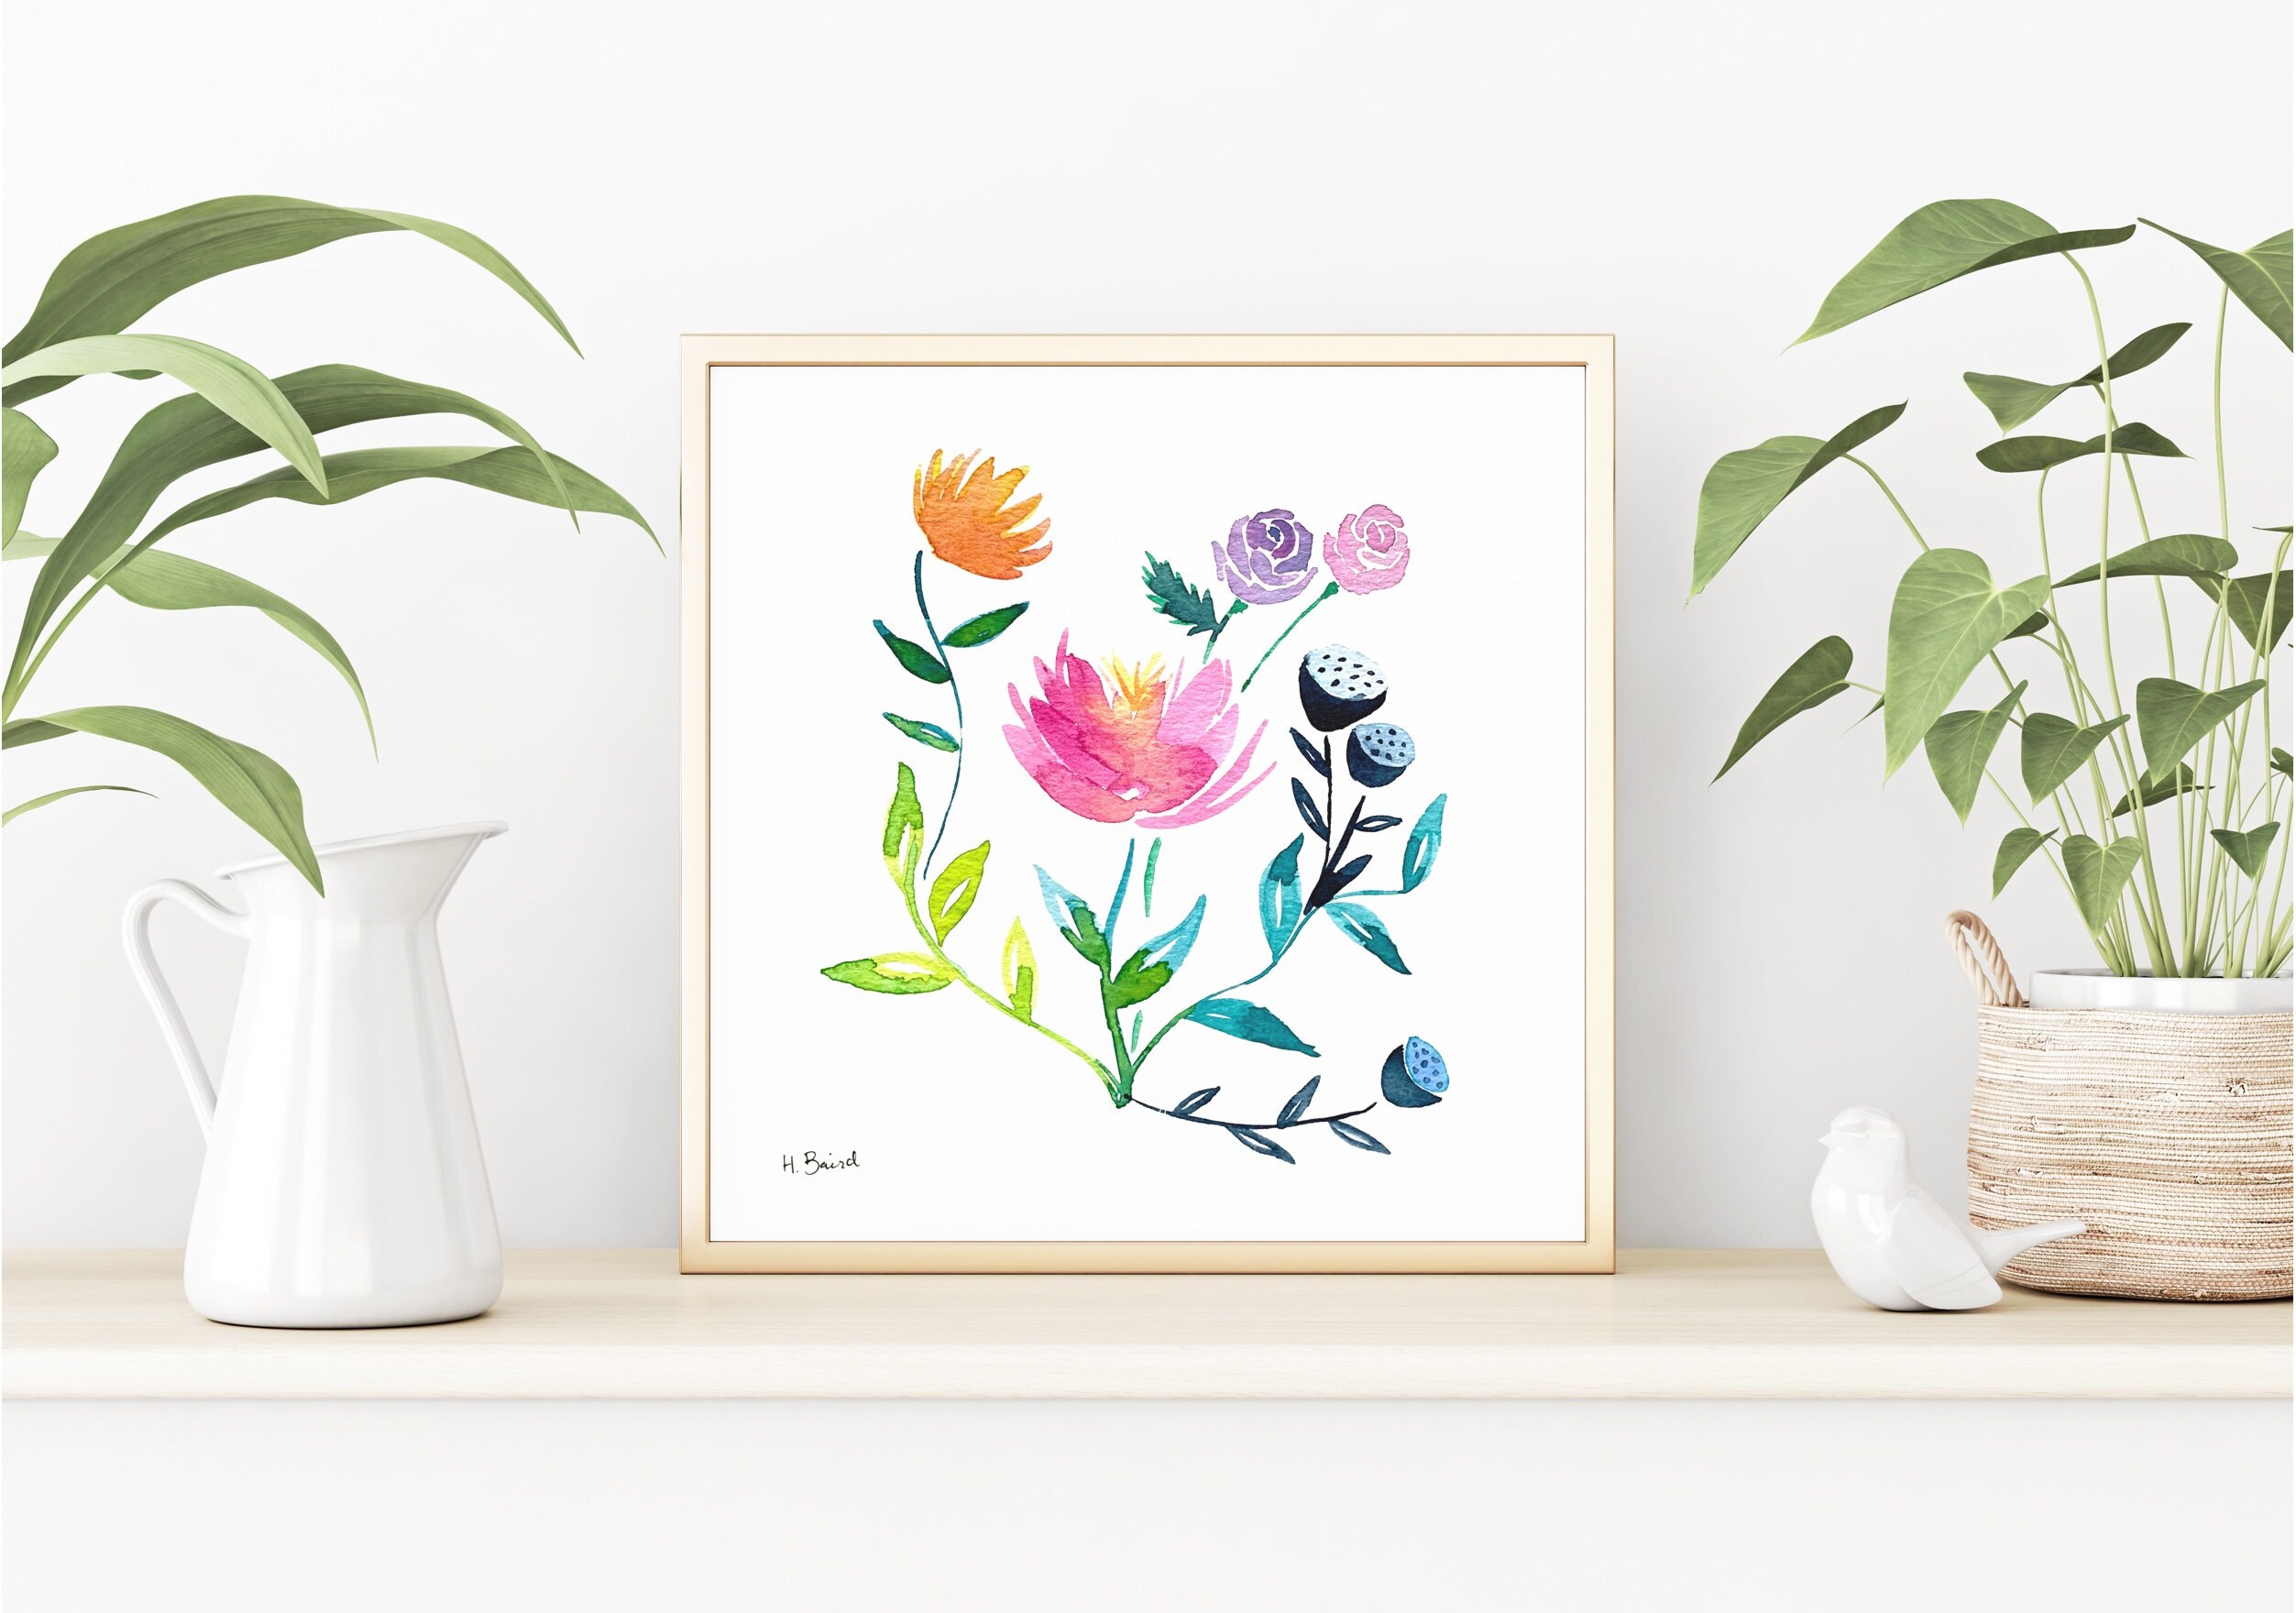 Whimsical Garden With Flowers and Foliage Square Art Print, 12x12 ...